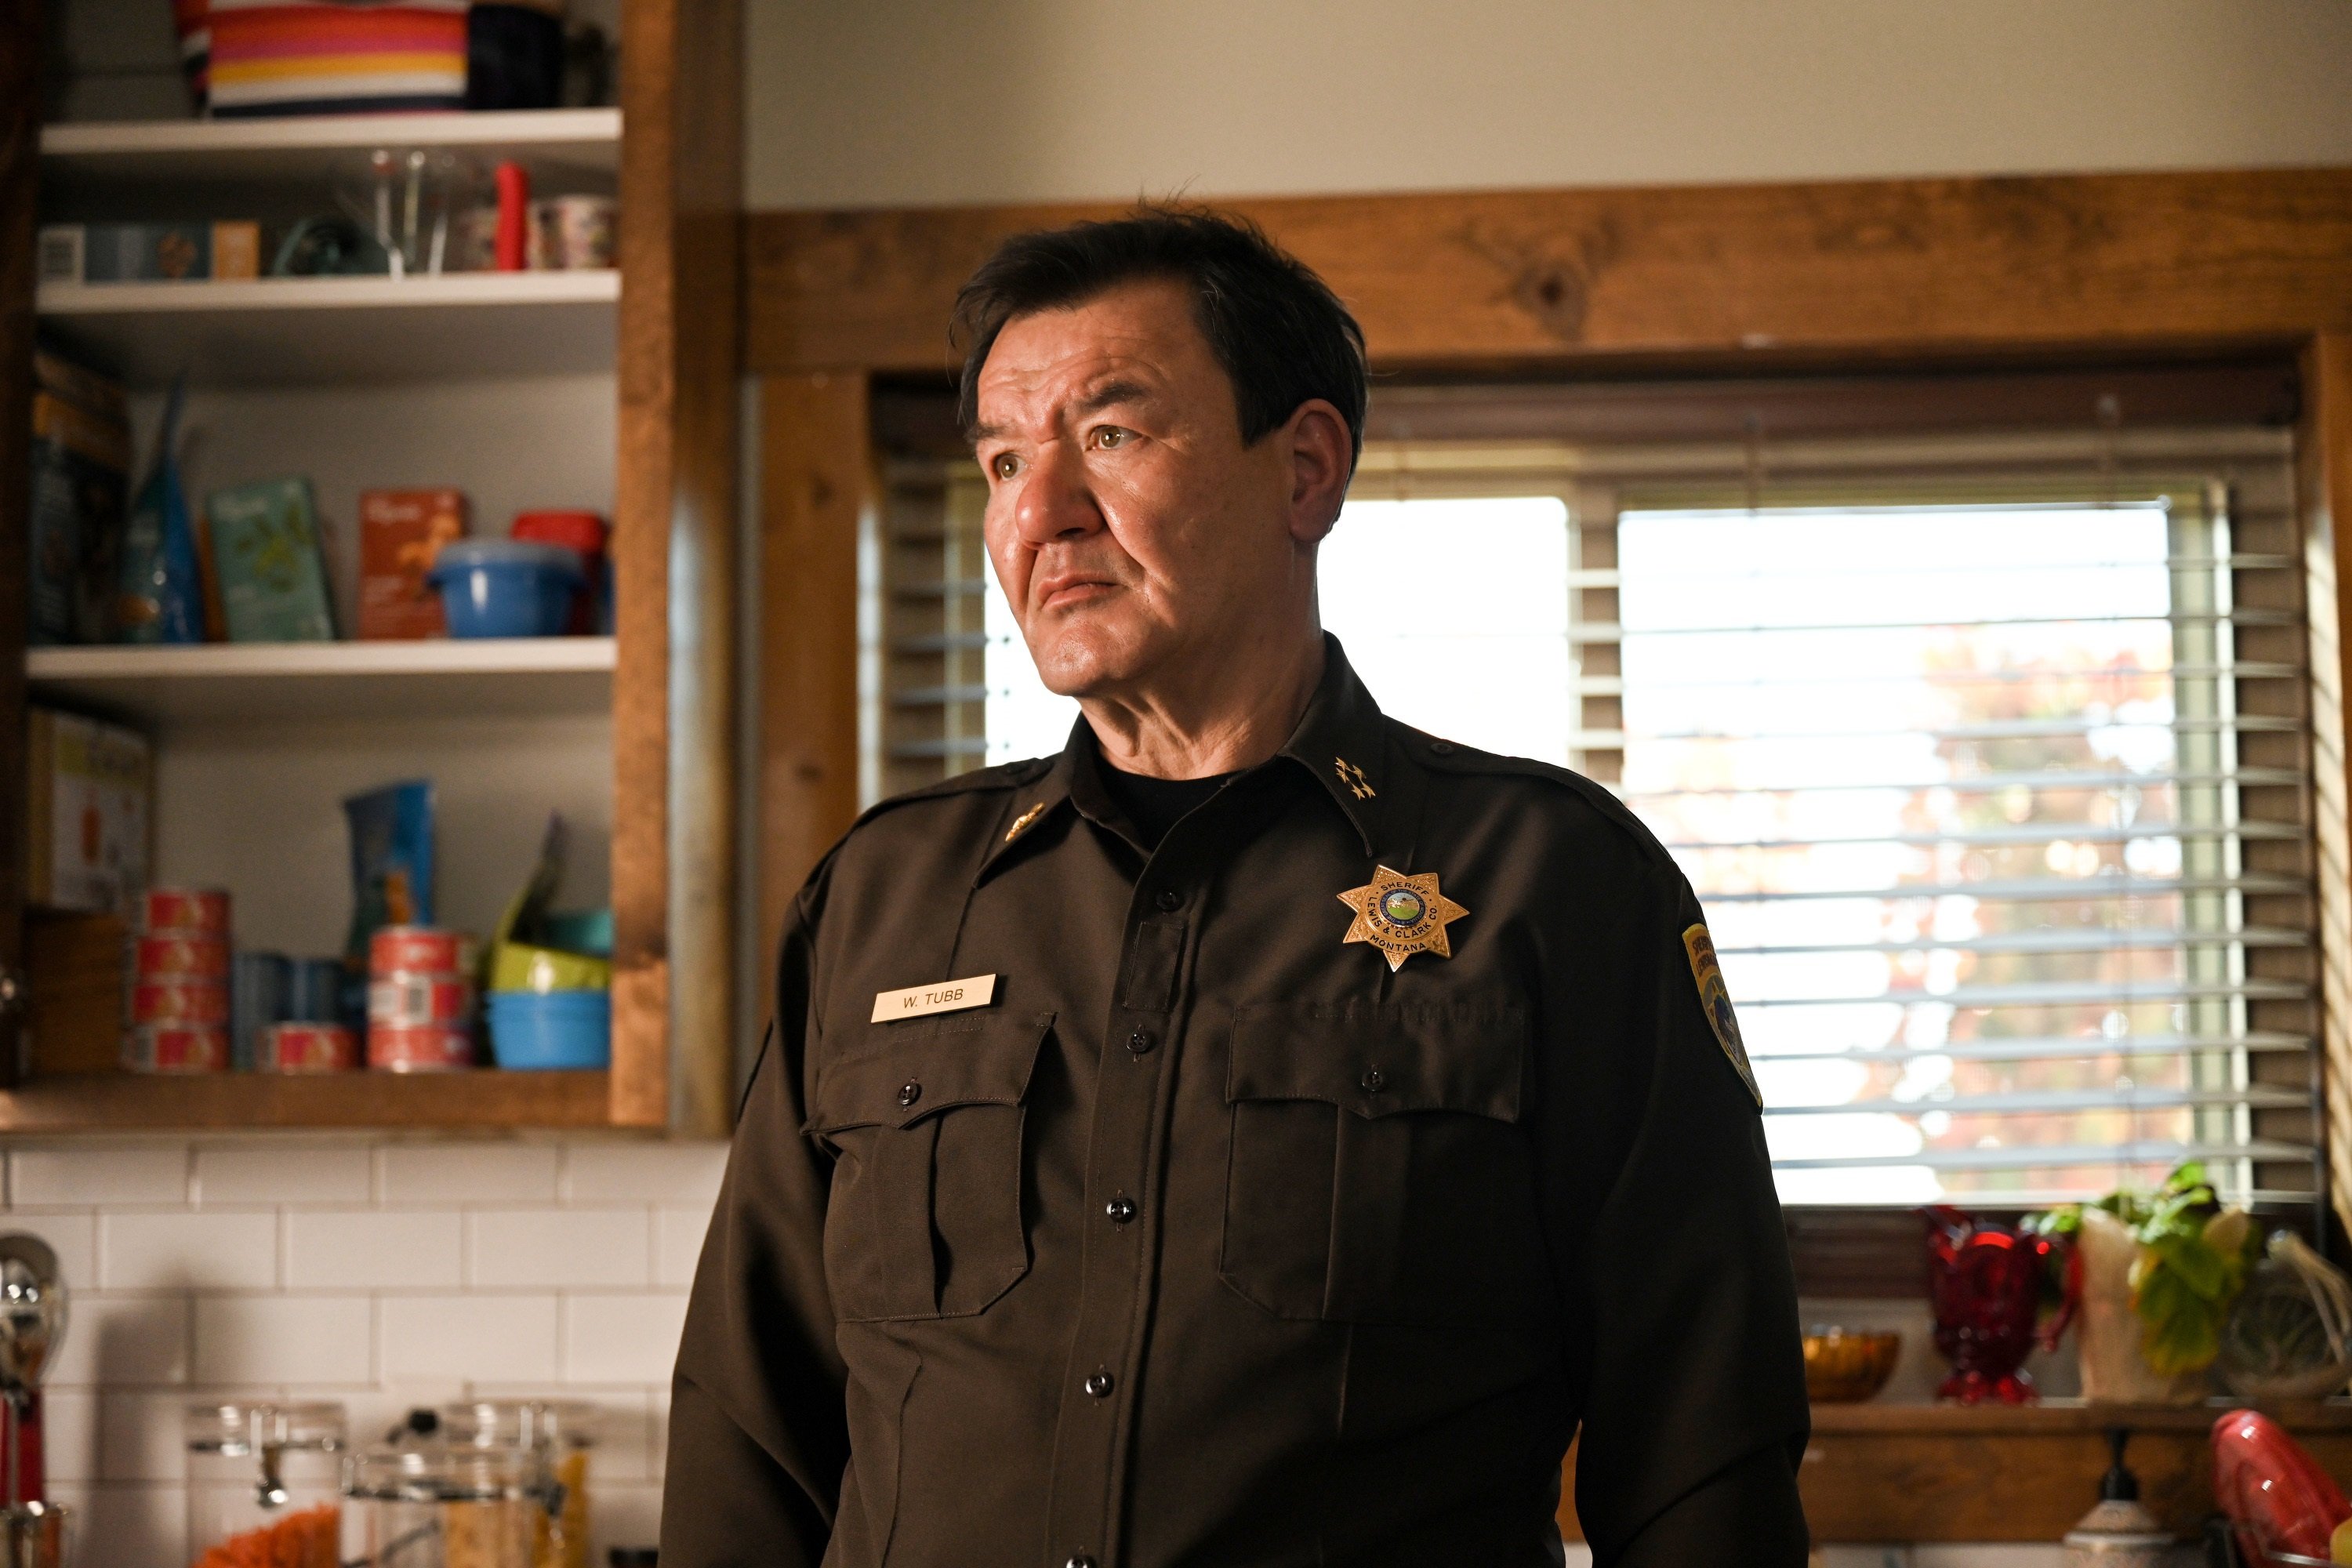 'Big Sky' Patrick Gallagher stares at something while standing in a kitchen as Sheriff Tubb